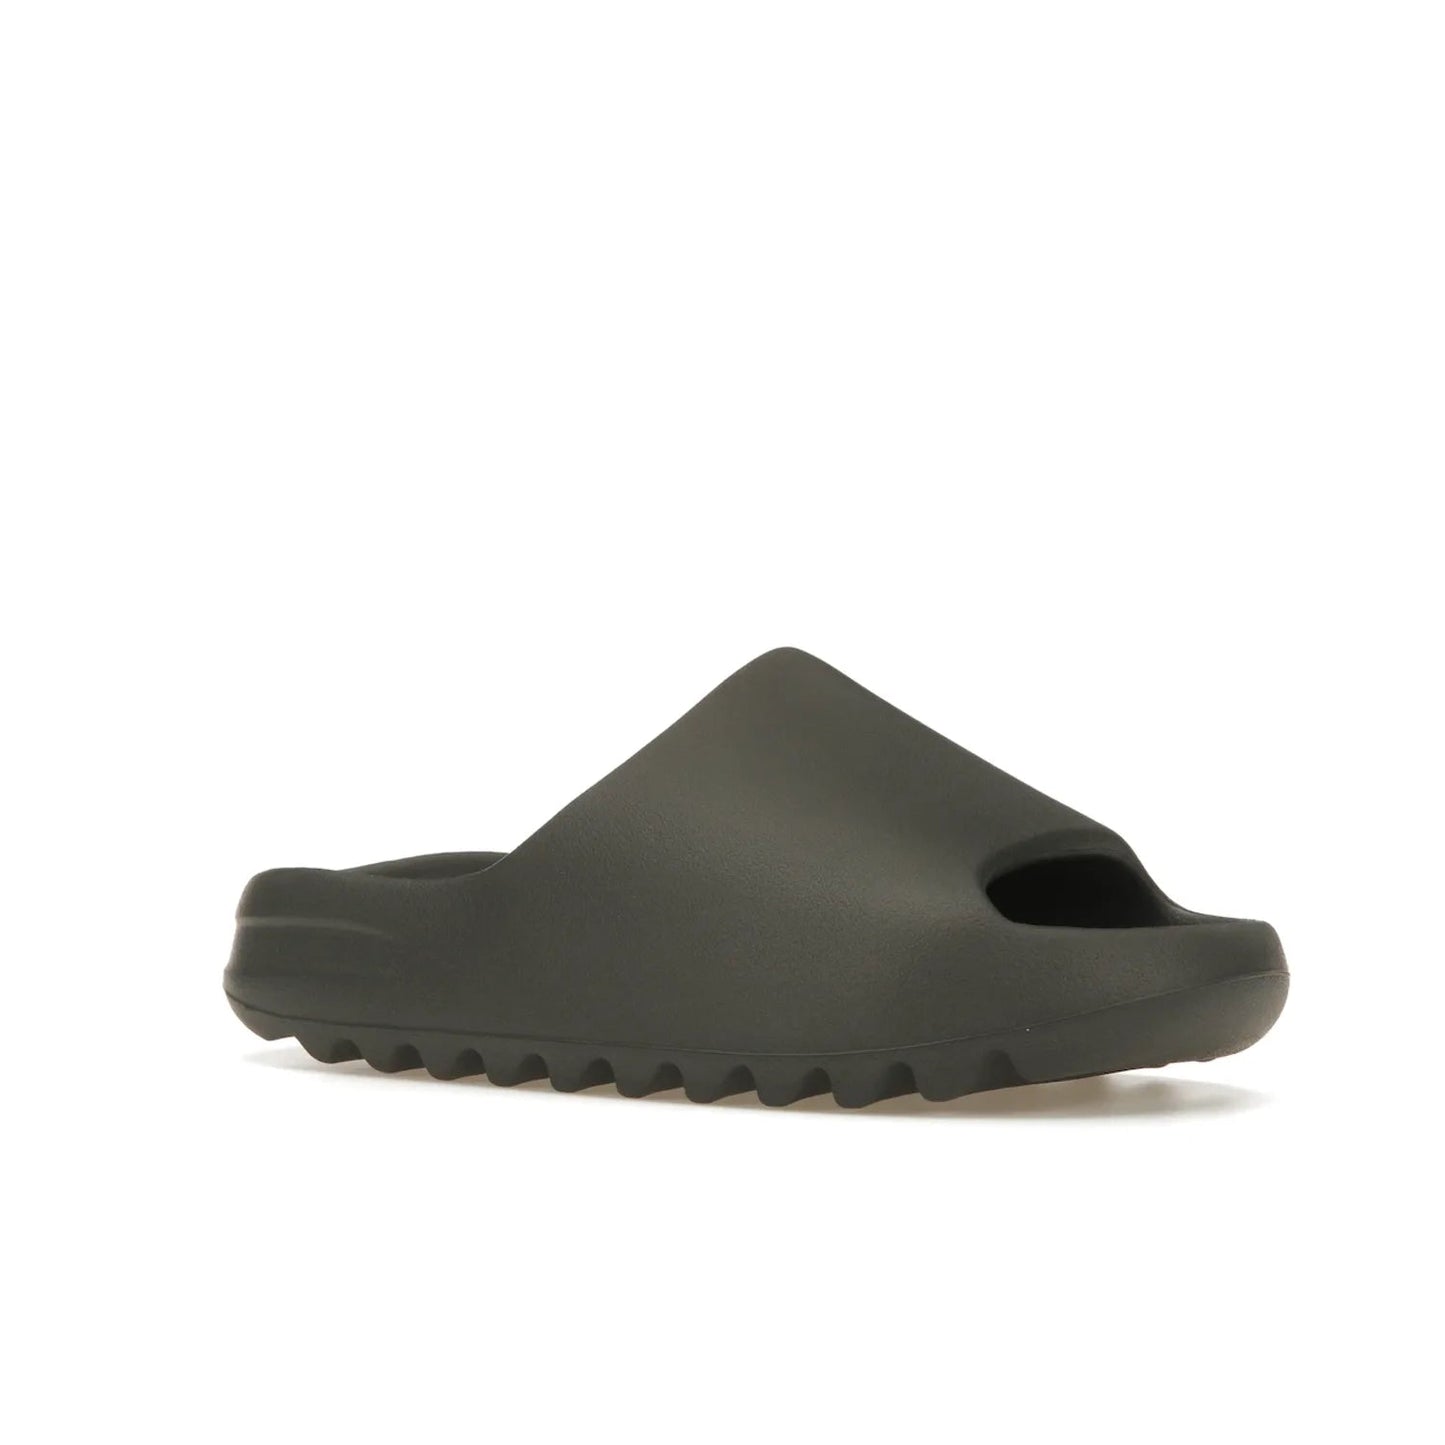 adidas Yeezy Slide Granite - Image 4 - Only at www.BallersClubKickz.com - Introducing the adidas Yeezy Slide Granite with a sleek, soft-to-touch one-piece upper – perfect for making a statement with its minimalistic design and luxurious comfort. Get yours now for only $70.